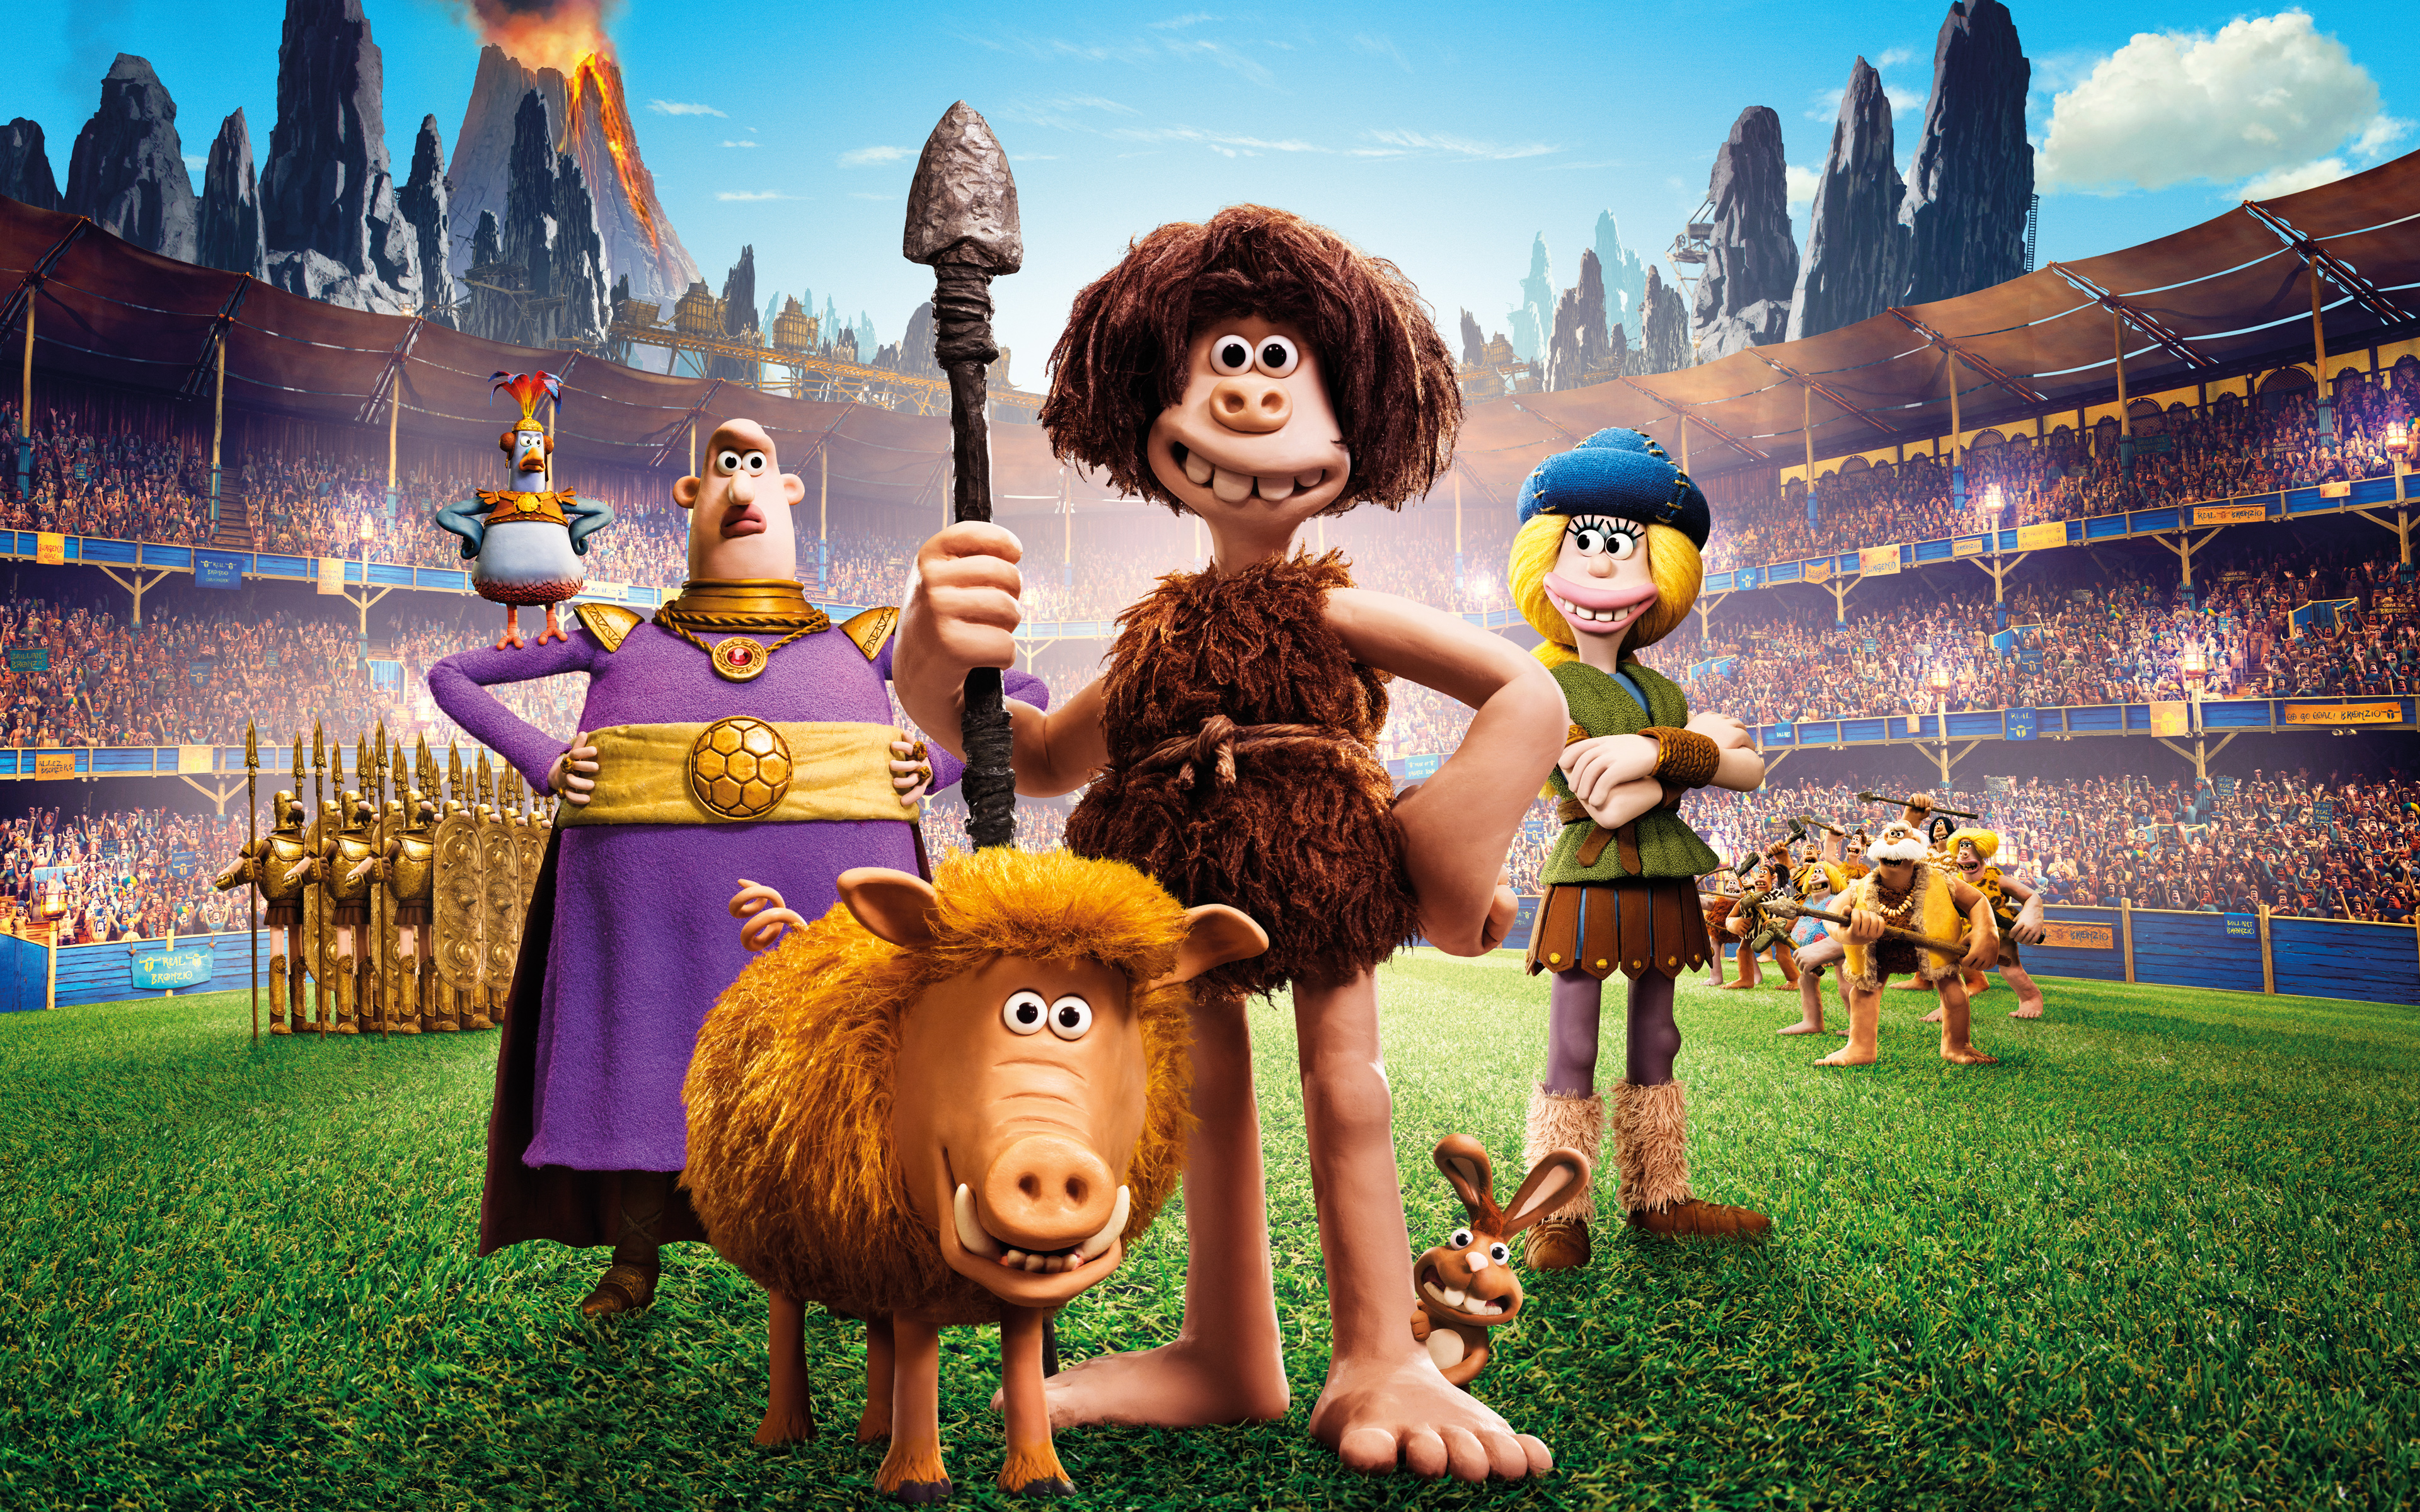 Early Man Animation 2018 4K 8K Wallpapers